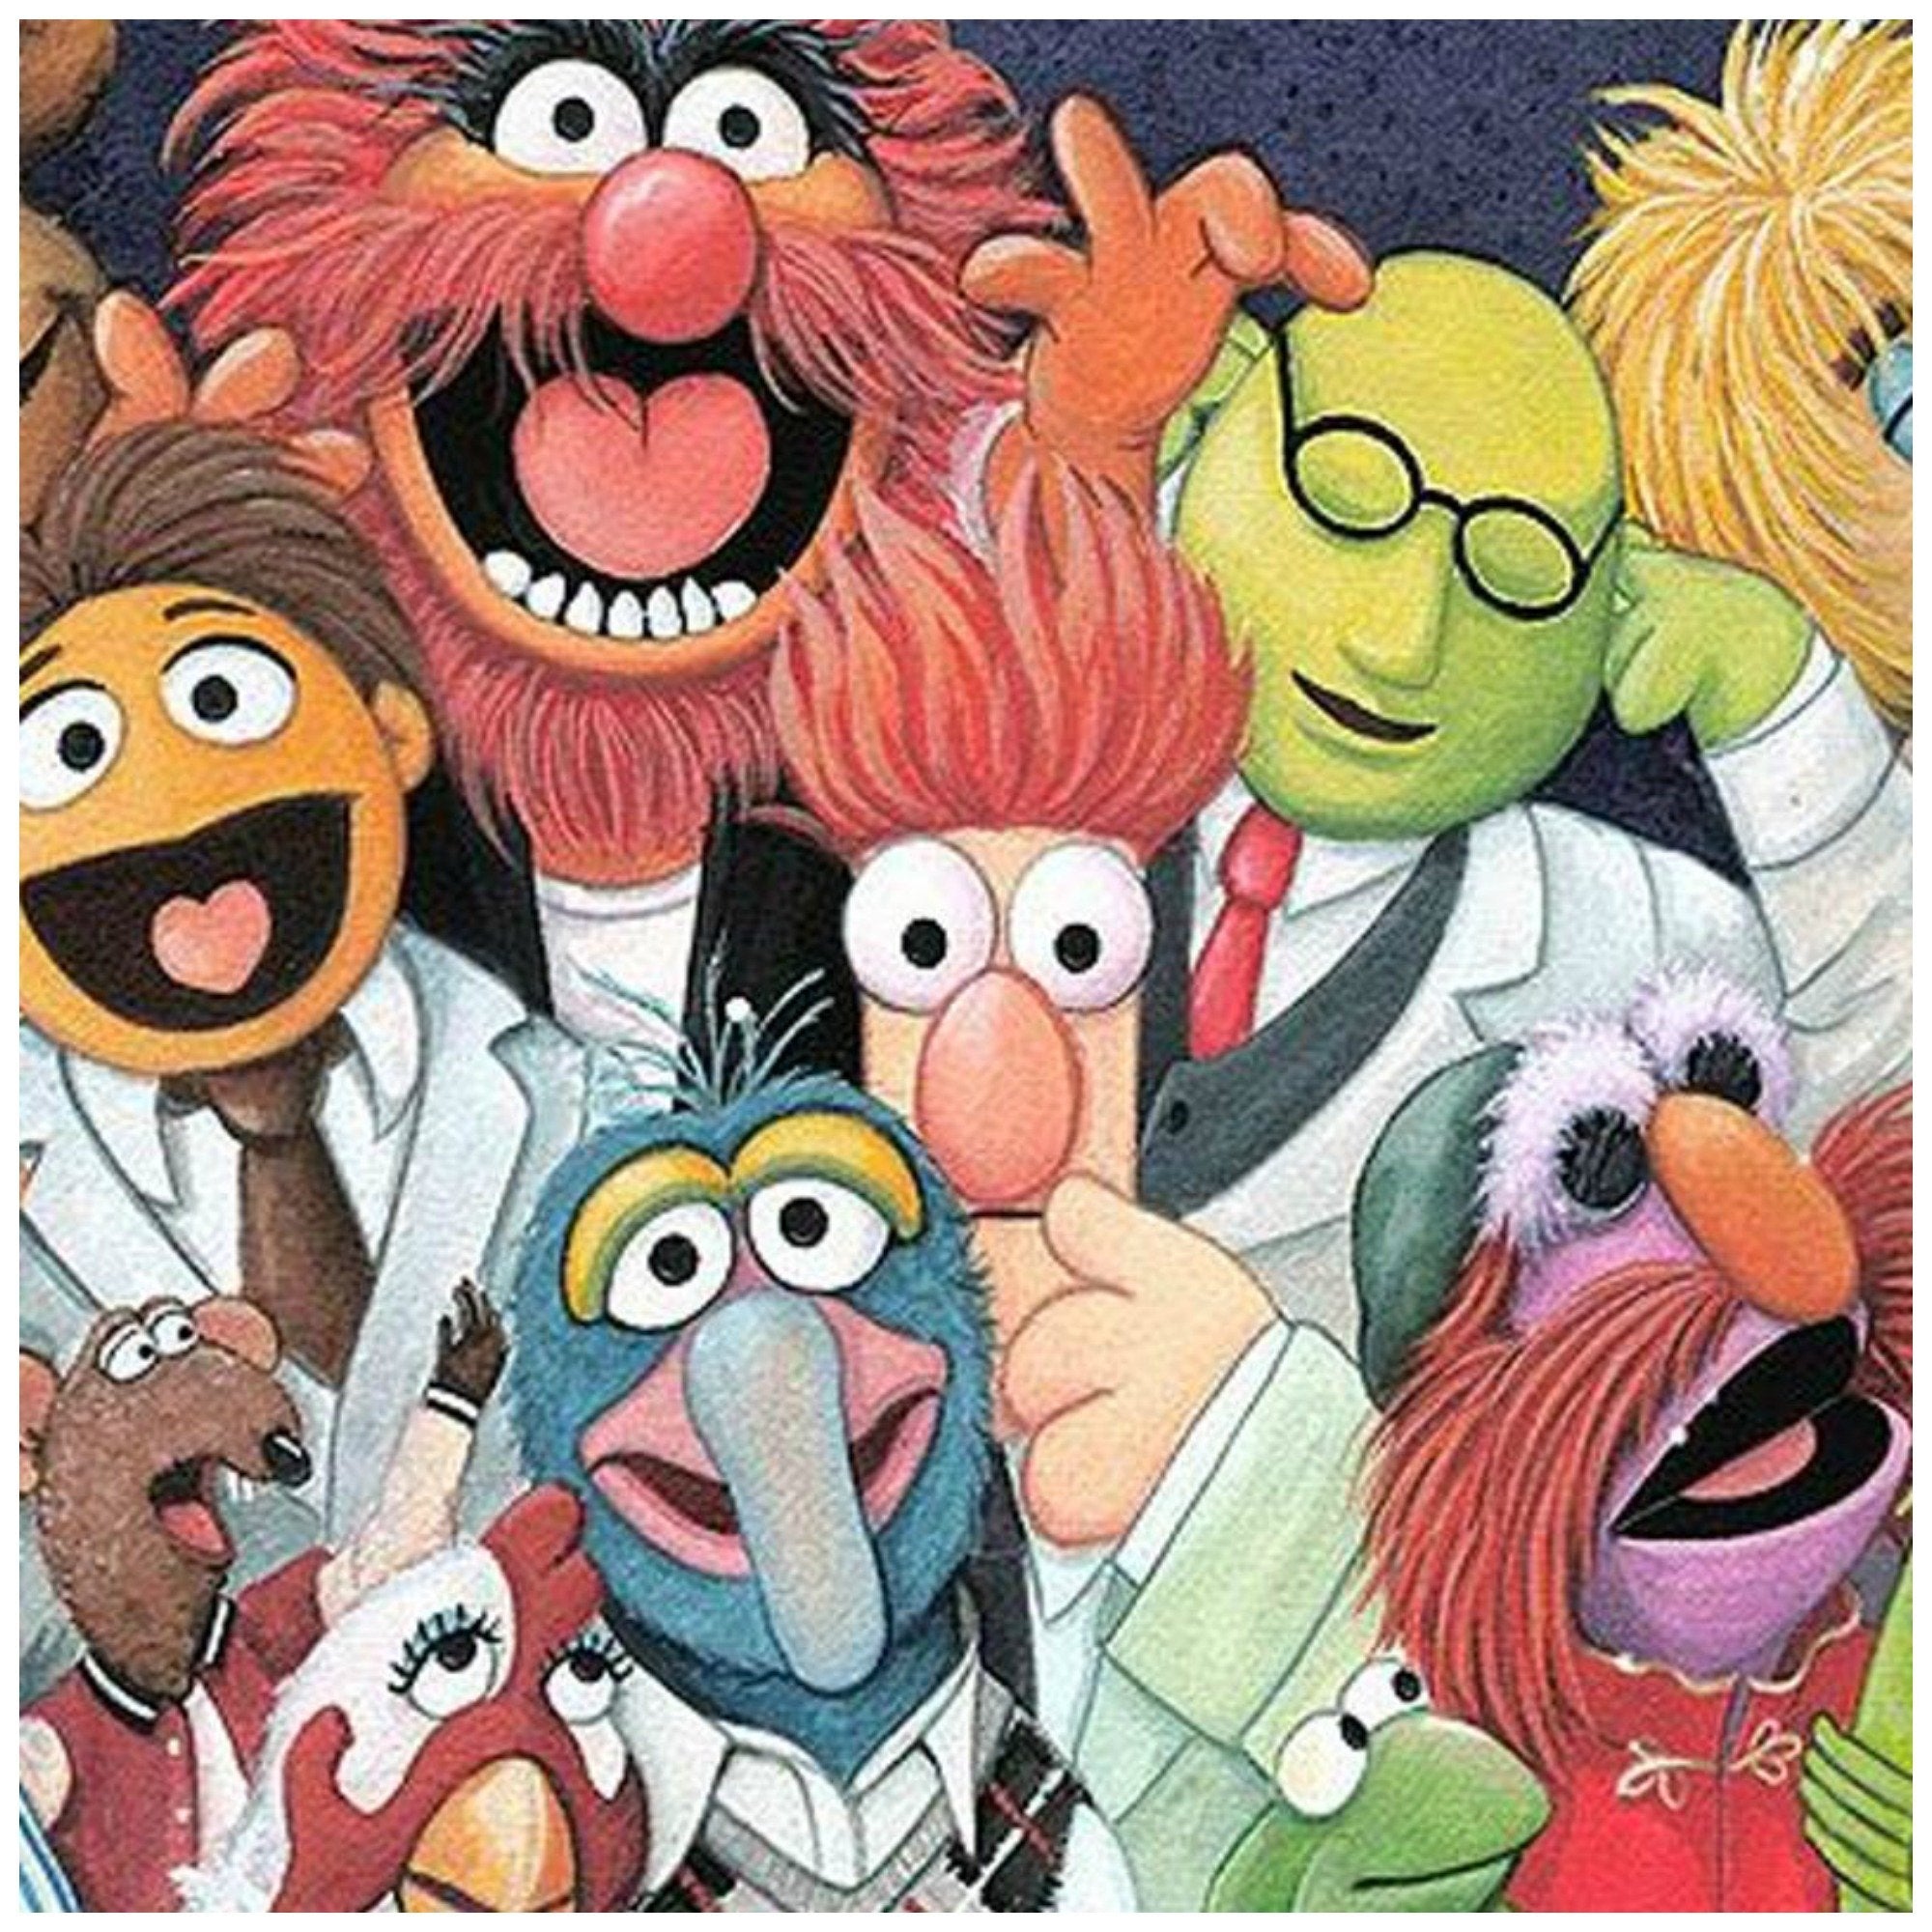 Back Stage at the Show  by Michelle St. Laurent.  All the muppet character actors line up before the show - closeup